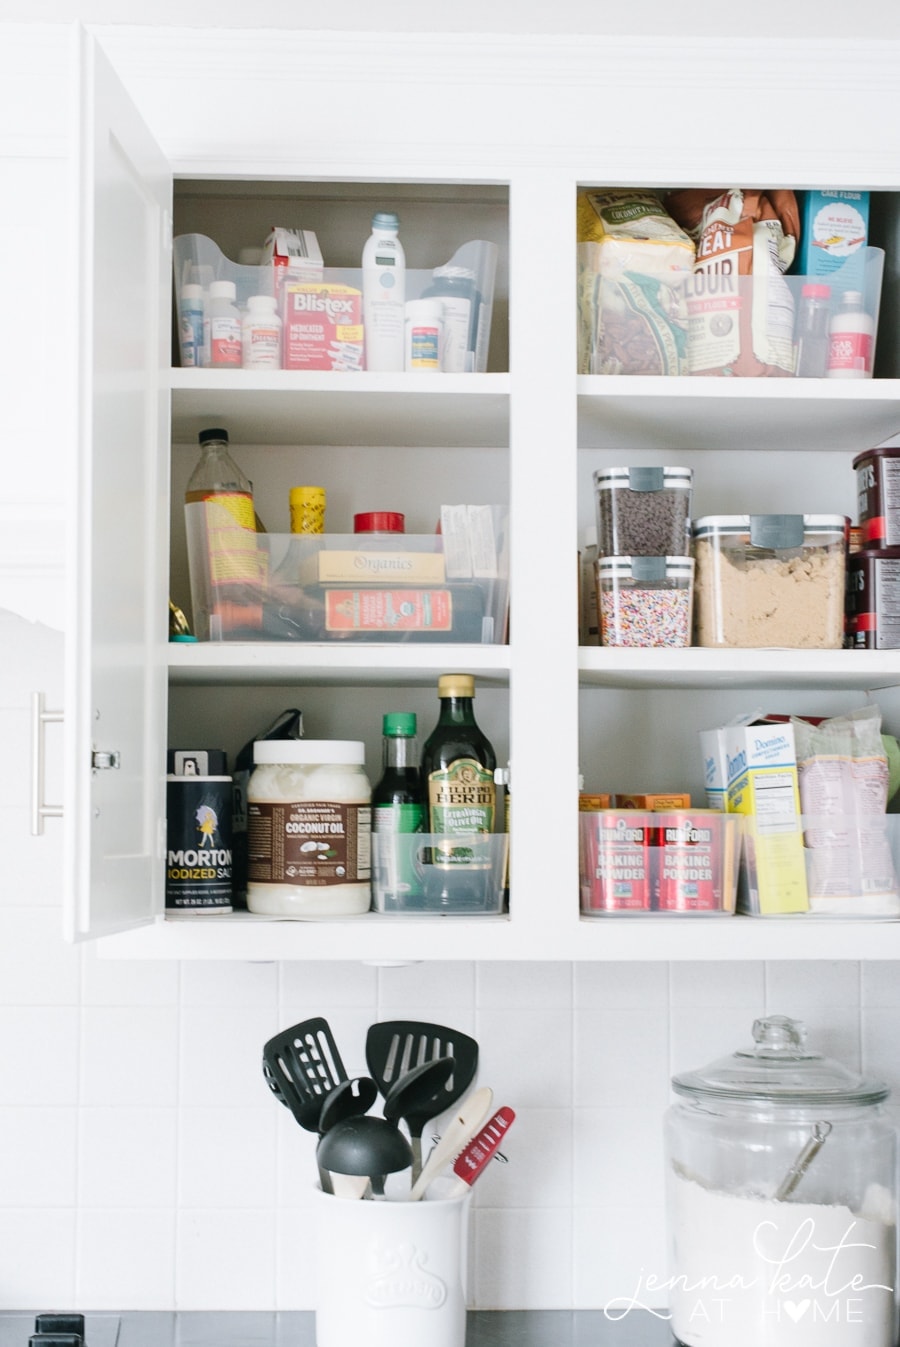 How to organize baking and cookies supplies in kitchen cabinets